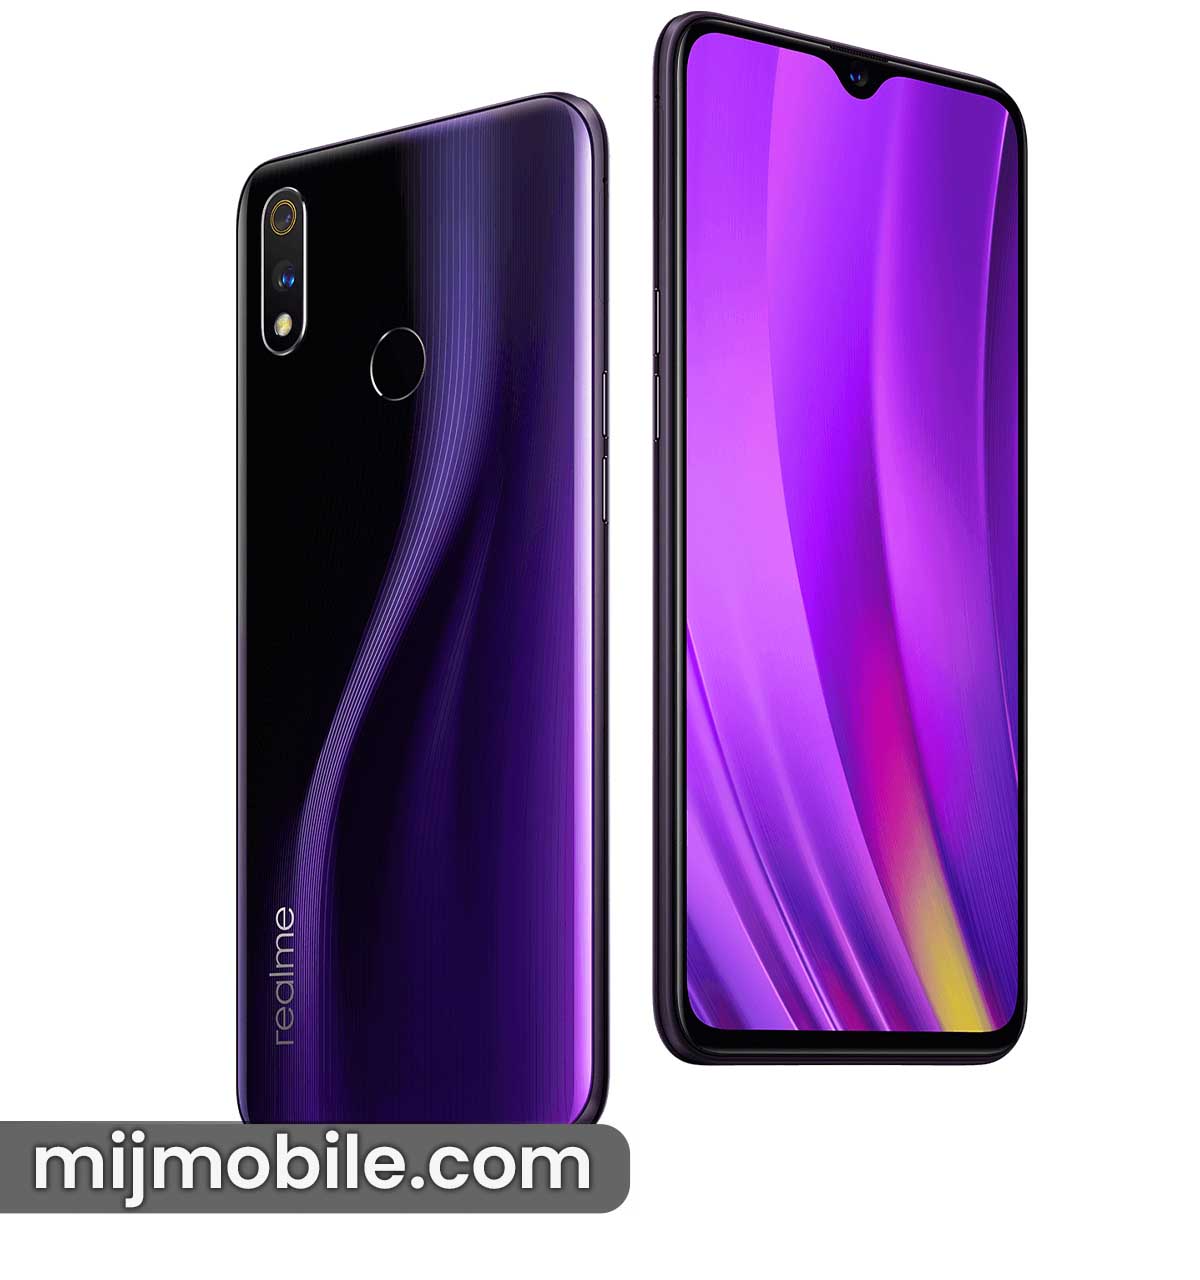 Realme 3 Pro Price in Pakistan & Specifications Realme 3 Pro Price in Pakistan is 35,499.